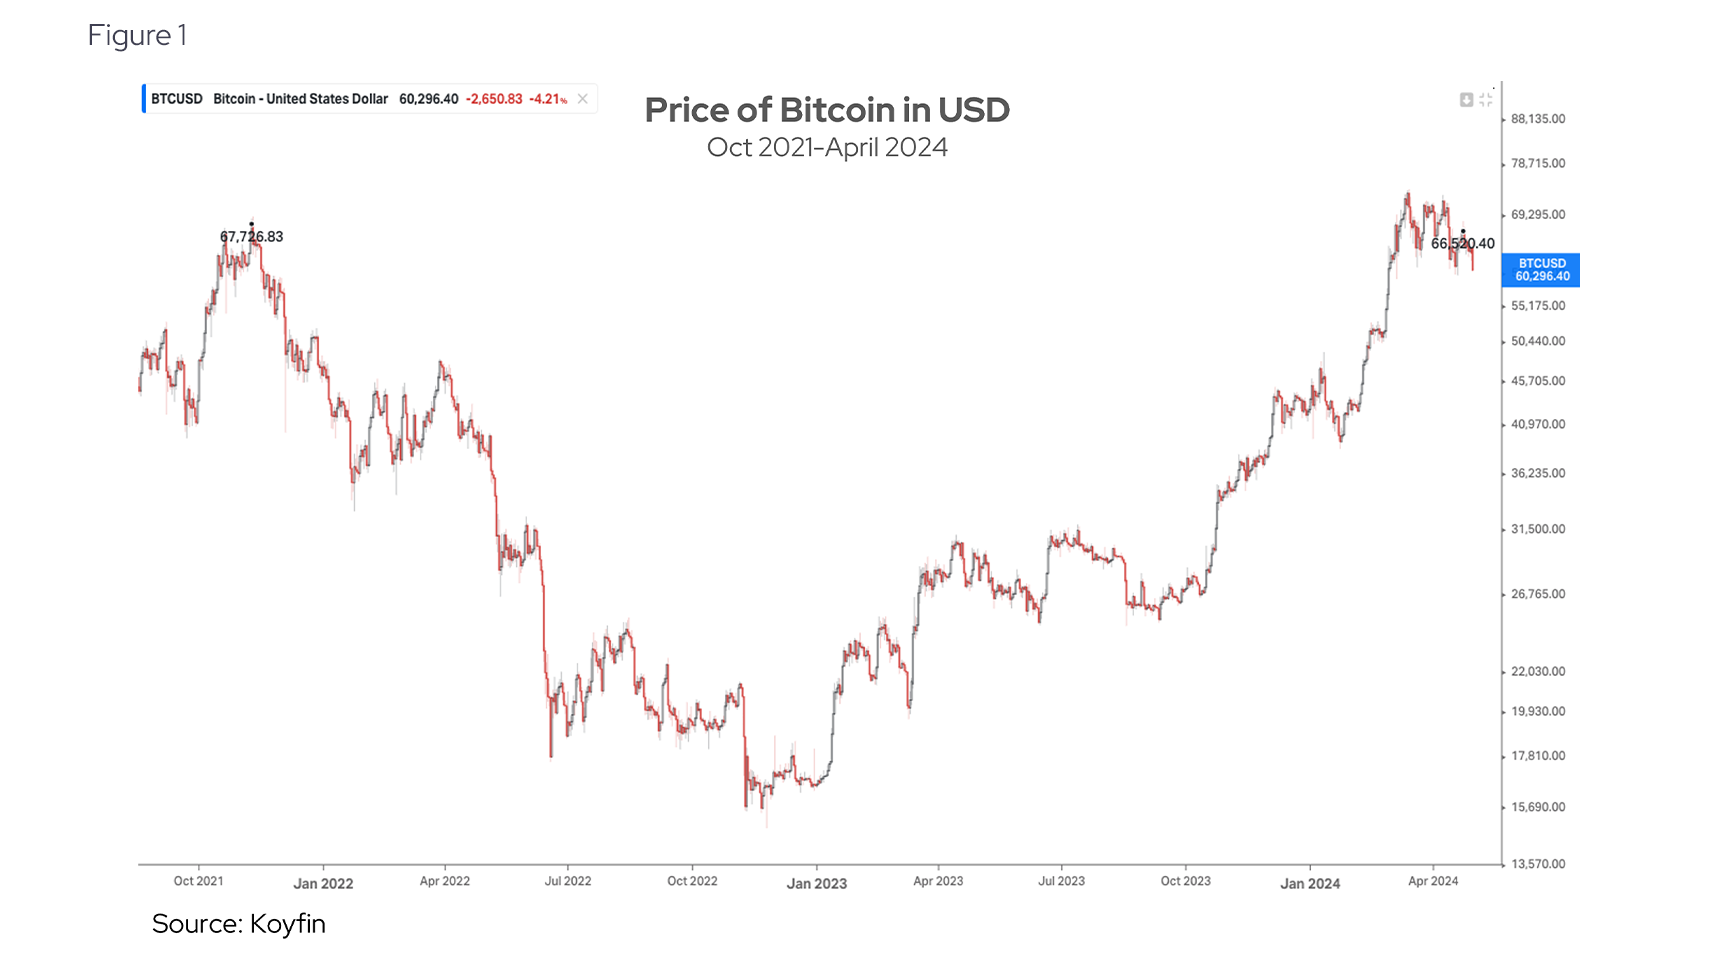 Price of Bitcoin in USD